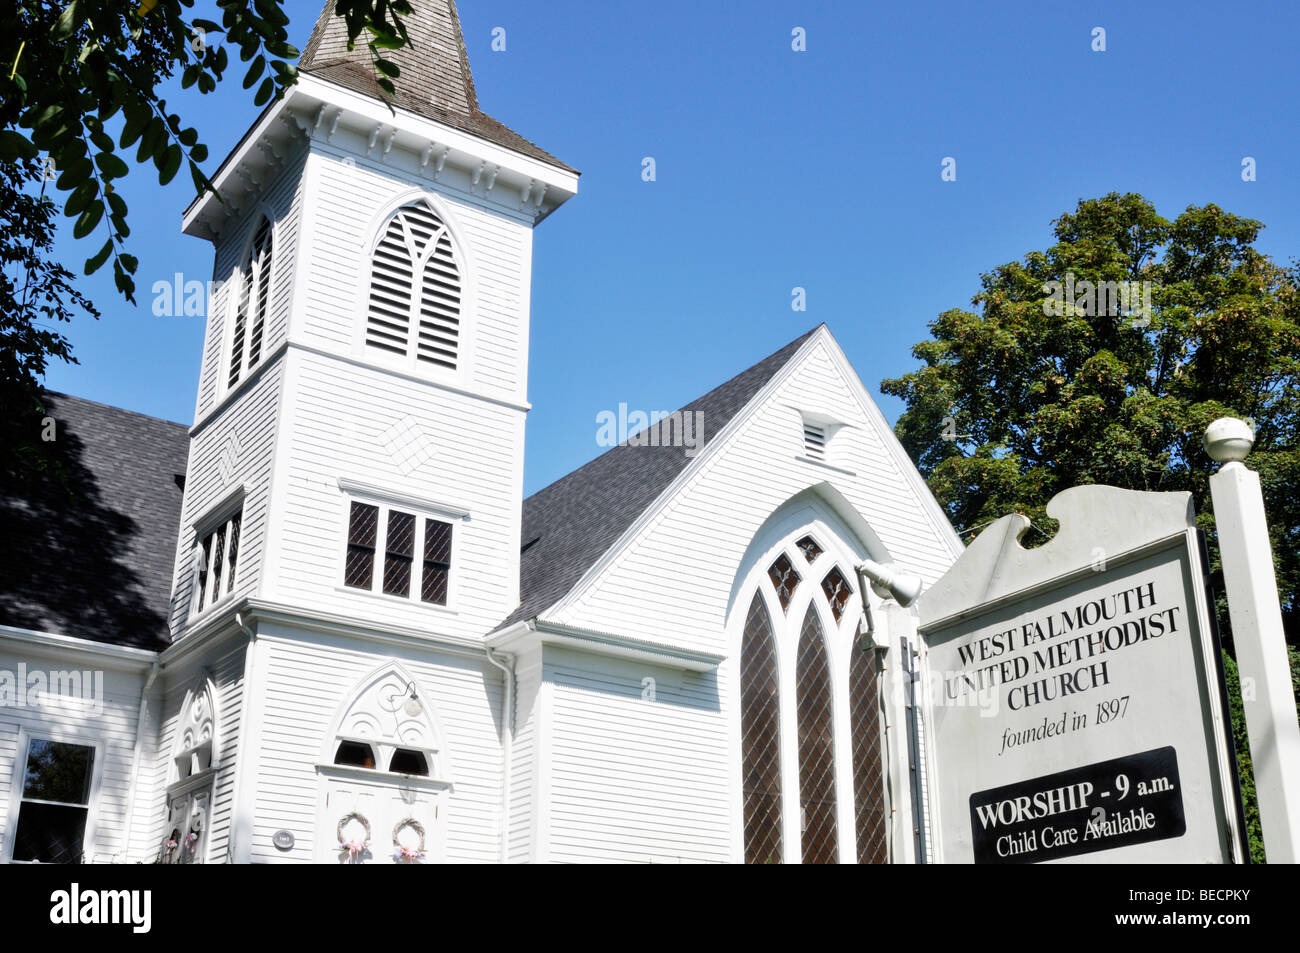 West Falmouth, Cape Cod, Massachusetts United Methodist Church founded 1897 Stock Photo